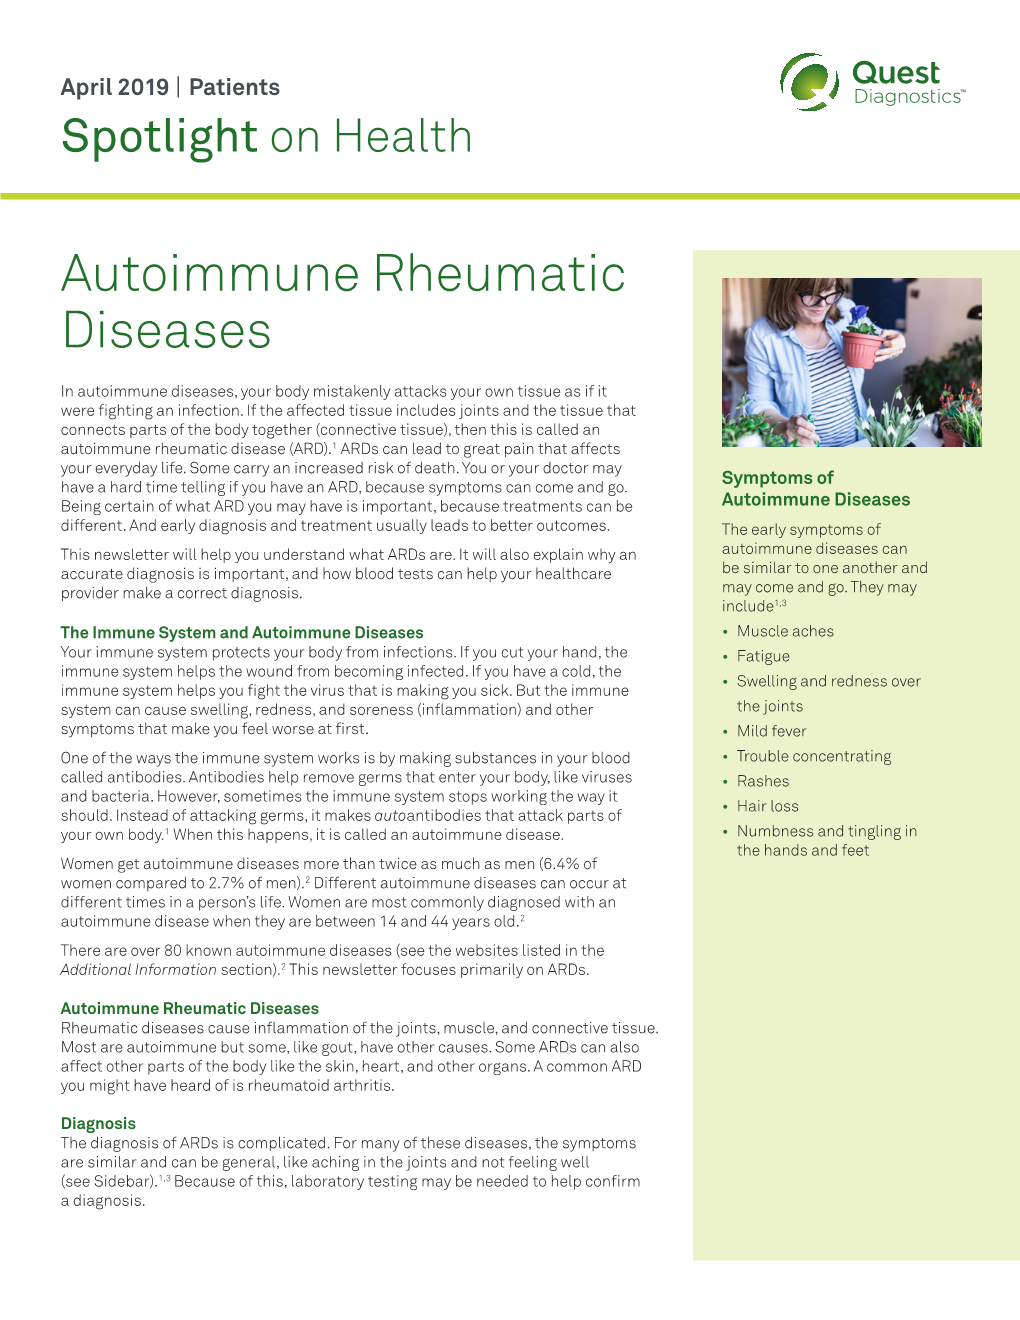 Autoimmune Rheumatic Diseases Rheumatic Diseases Cause Inflammation of the Joints, Muscle, and Connective Tissue